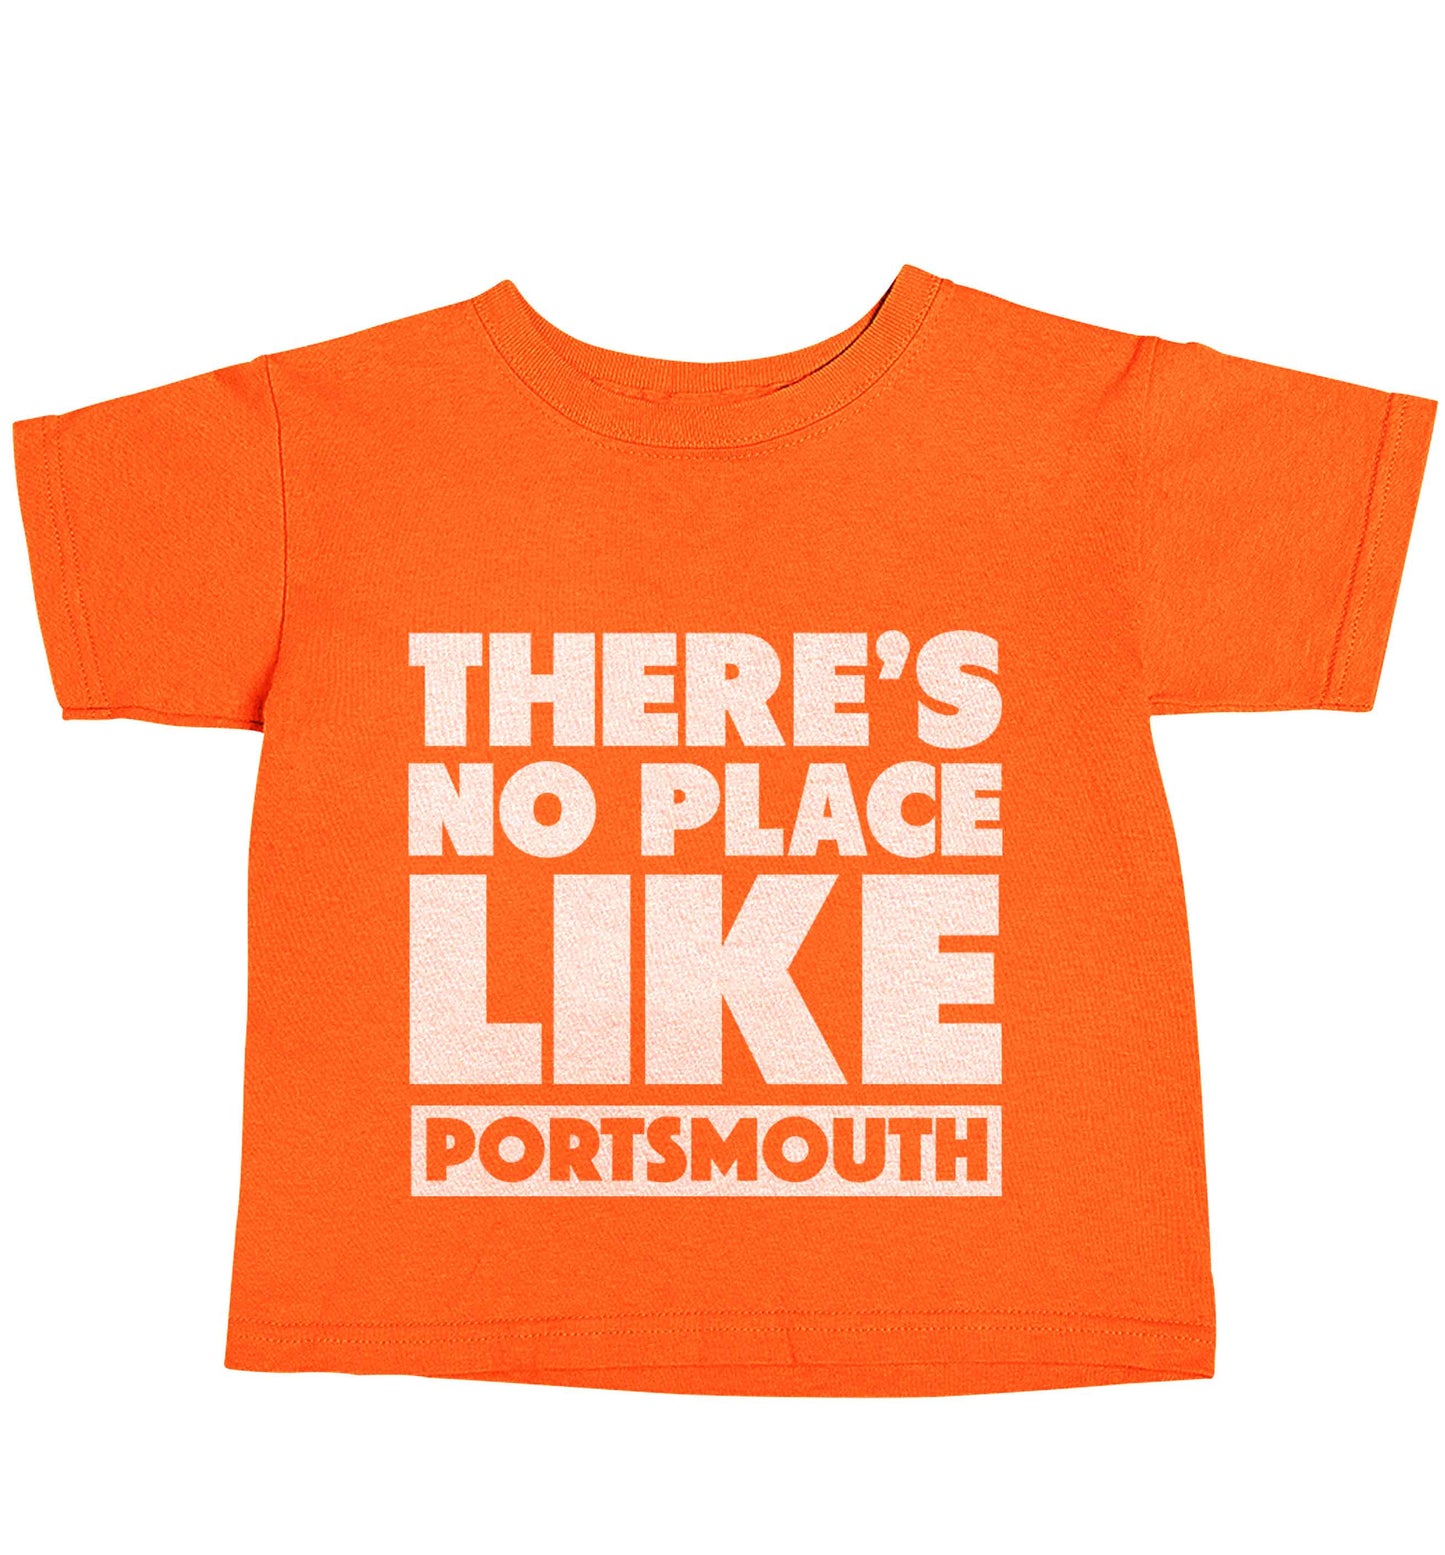 There's no place like Porstmouth orange baby toddler Tshirt 2 Years